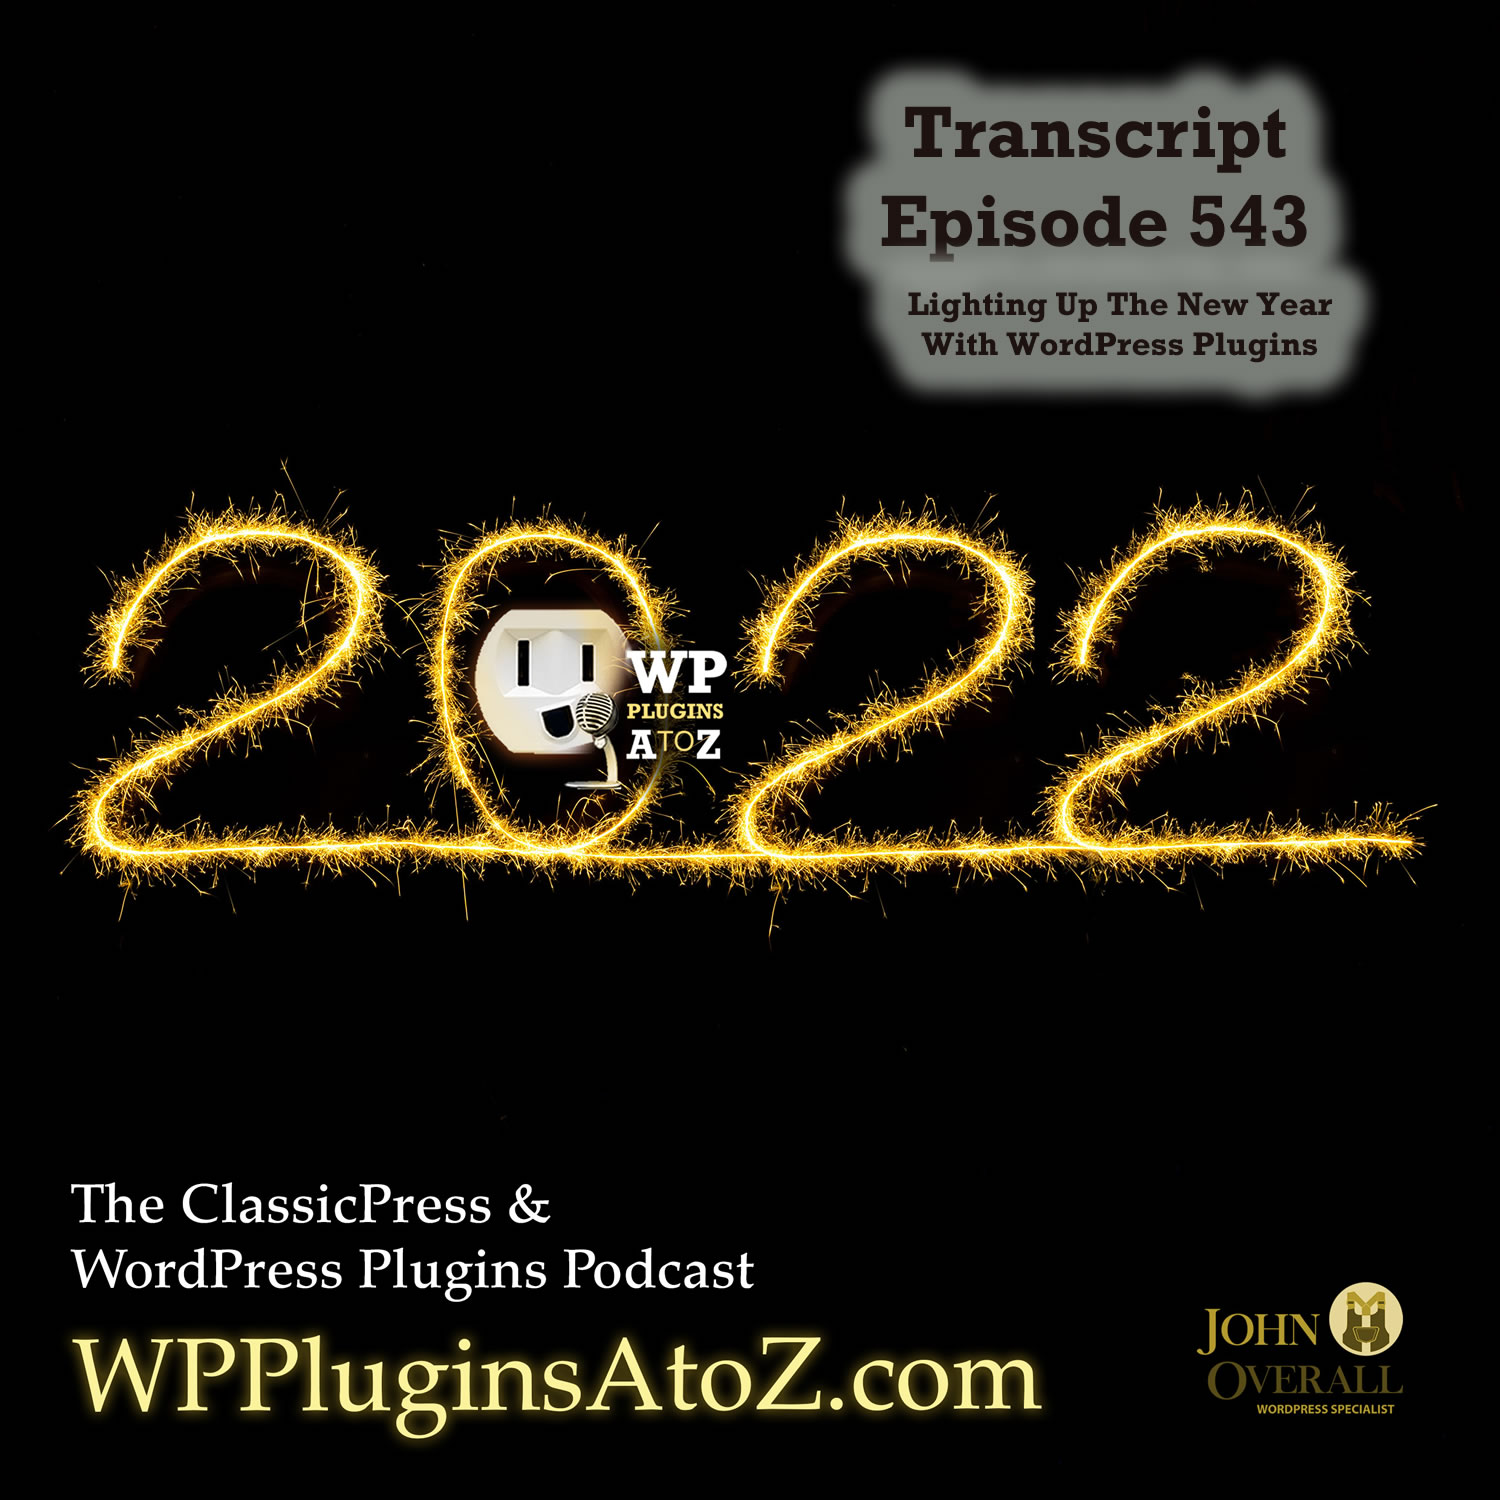 Transcript for Episode 543 and we have plugins for Rocket Fire, Mojo Authentication, Confetti, Hot Swinging Images, Newspapering Style, Date'n'Time shortened... and ClassicPress Options. It's all coming up on WordPress Plugins A-Z!